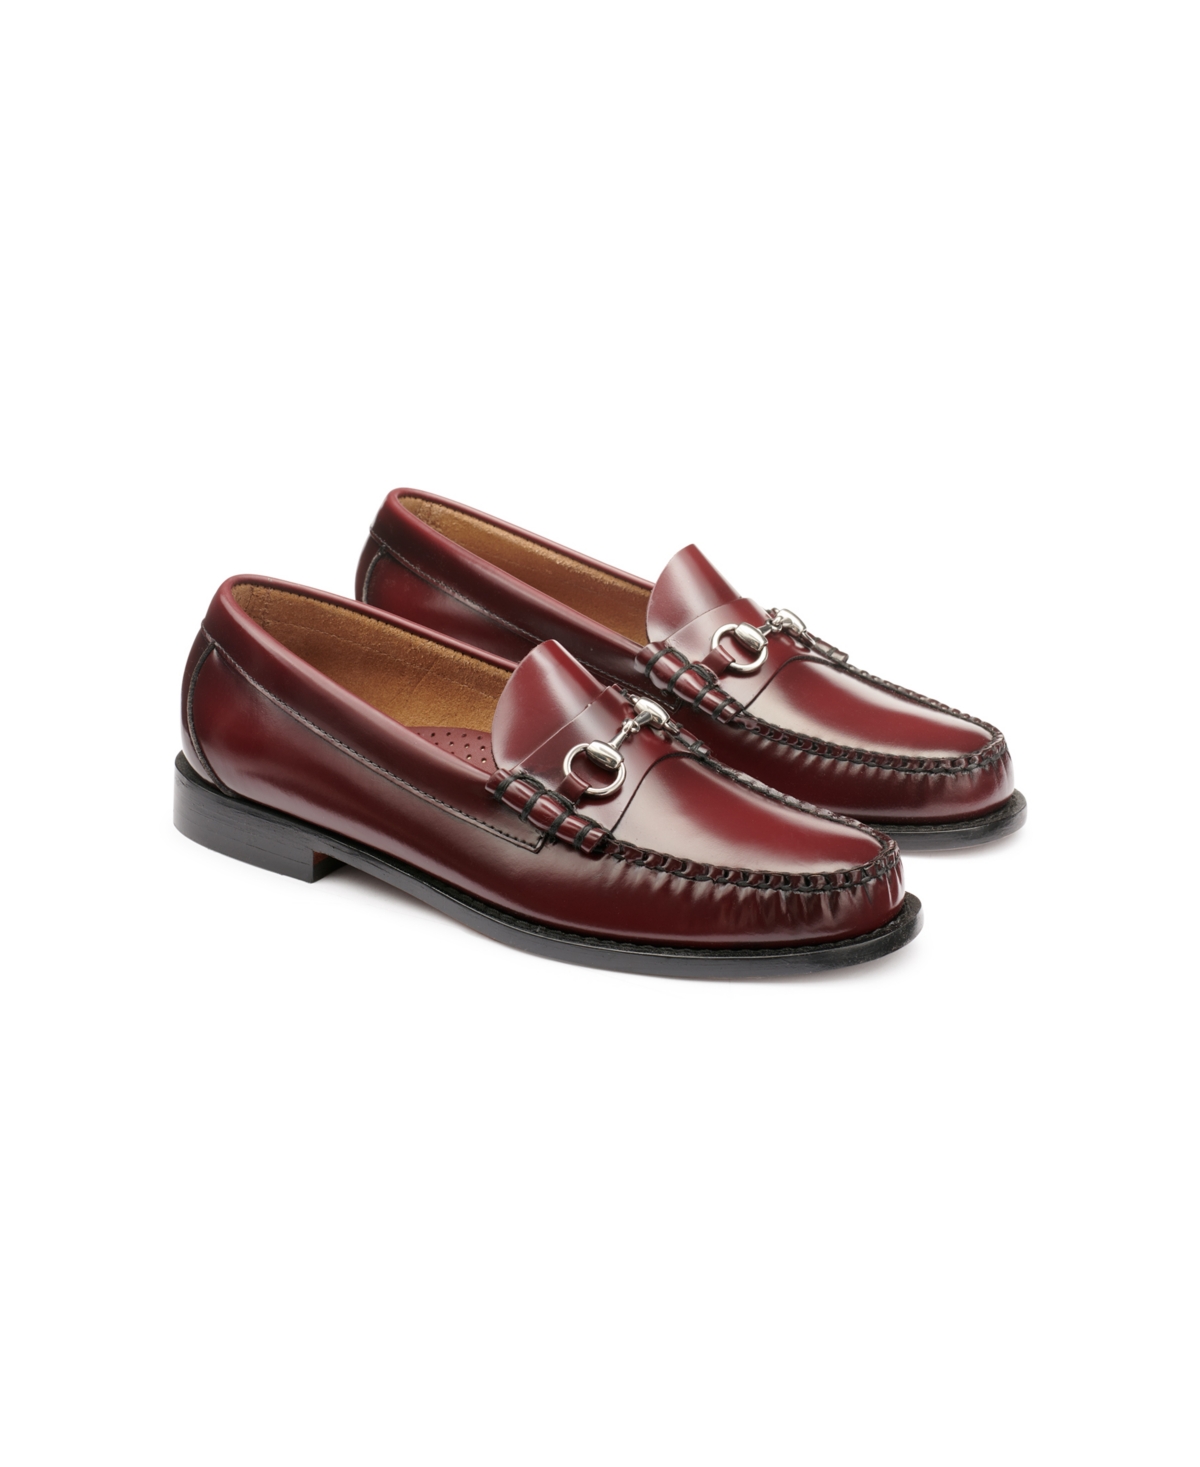 Gh Bass G.h.bass Men's Lincoln Weejuns Bit Loafers In Wine